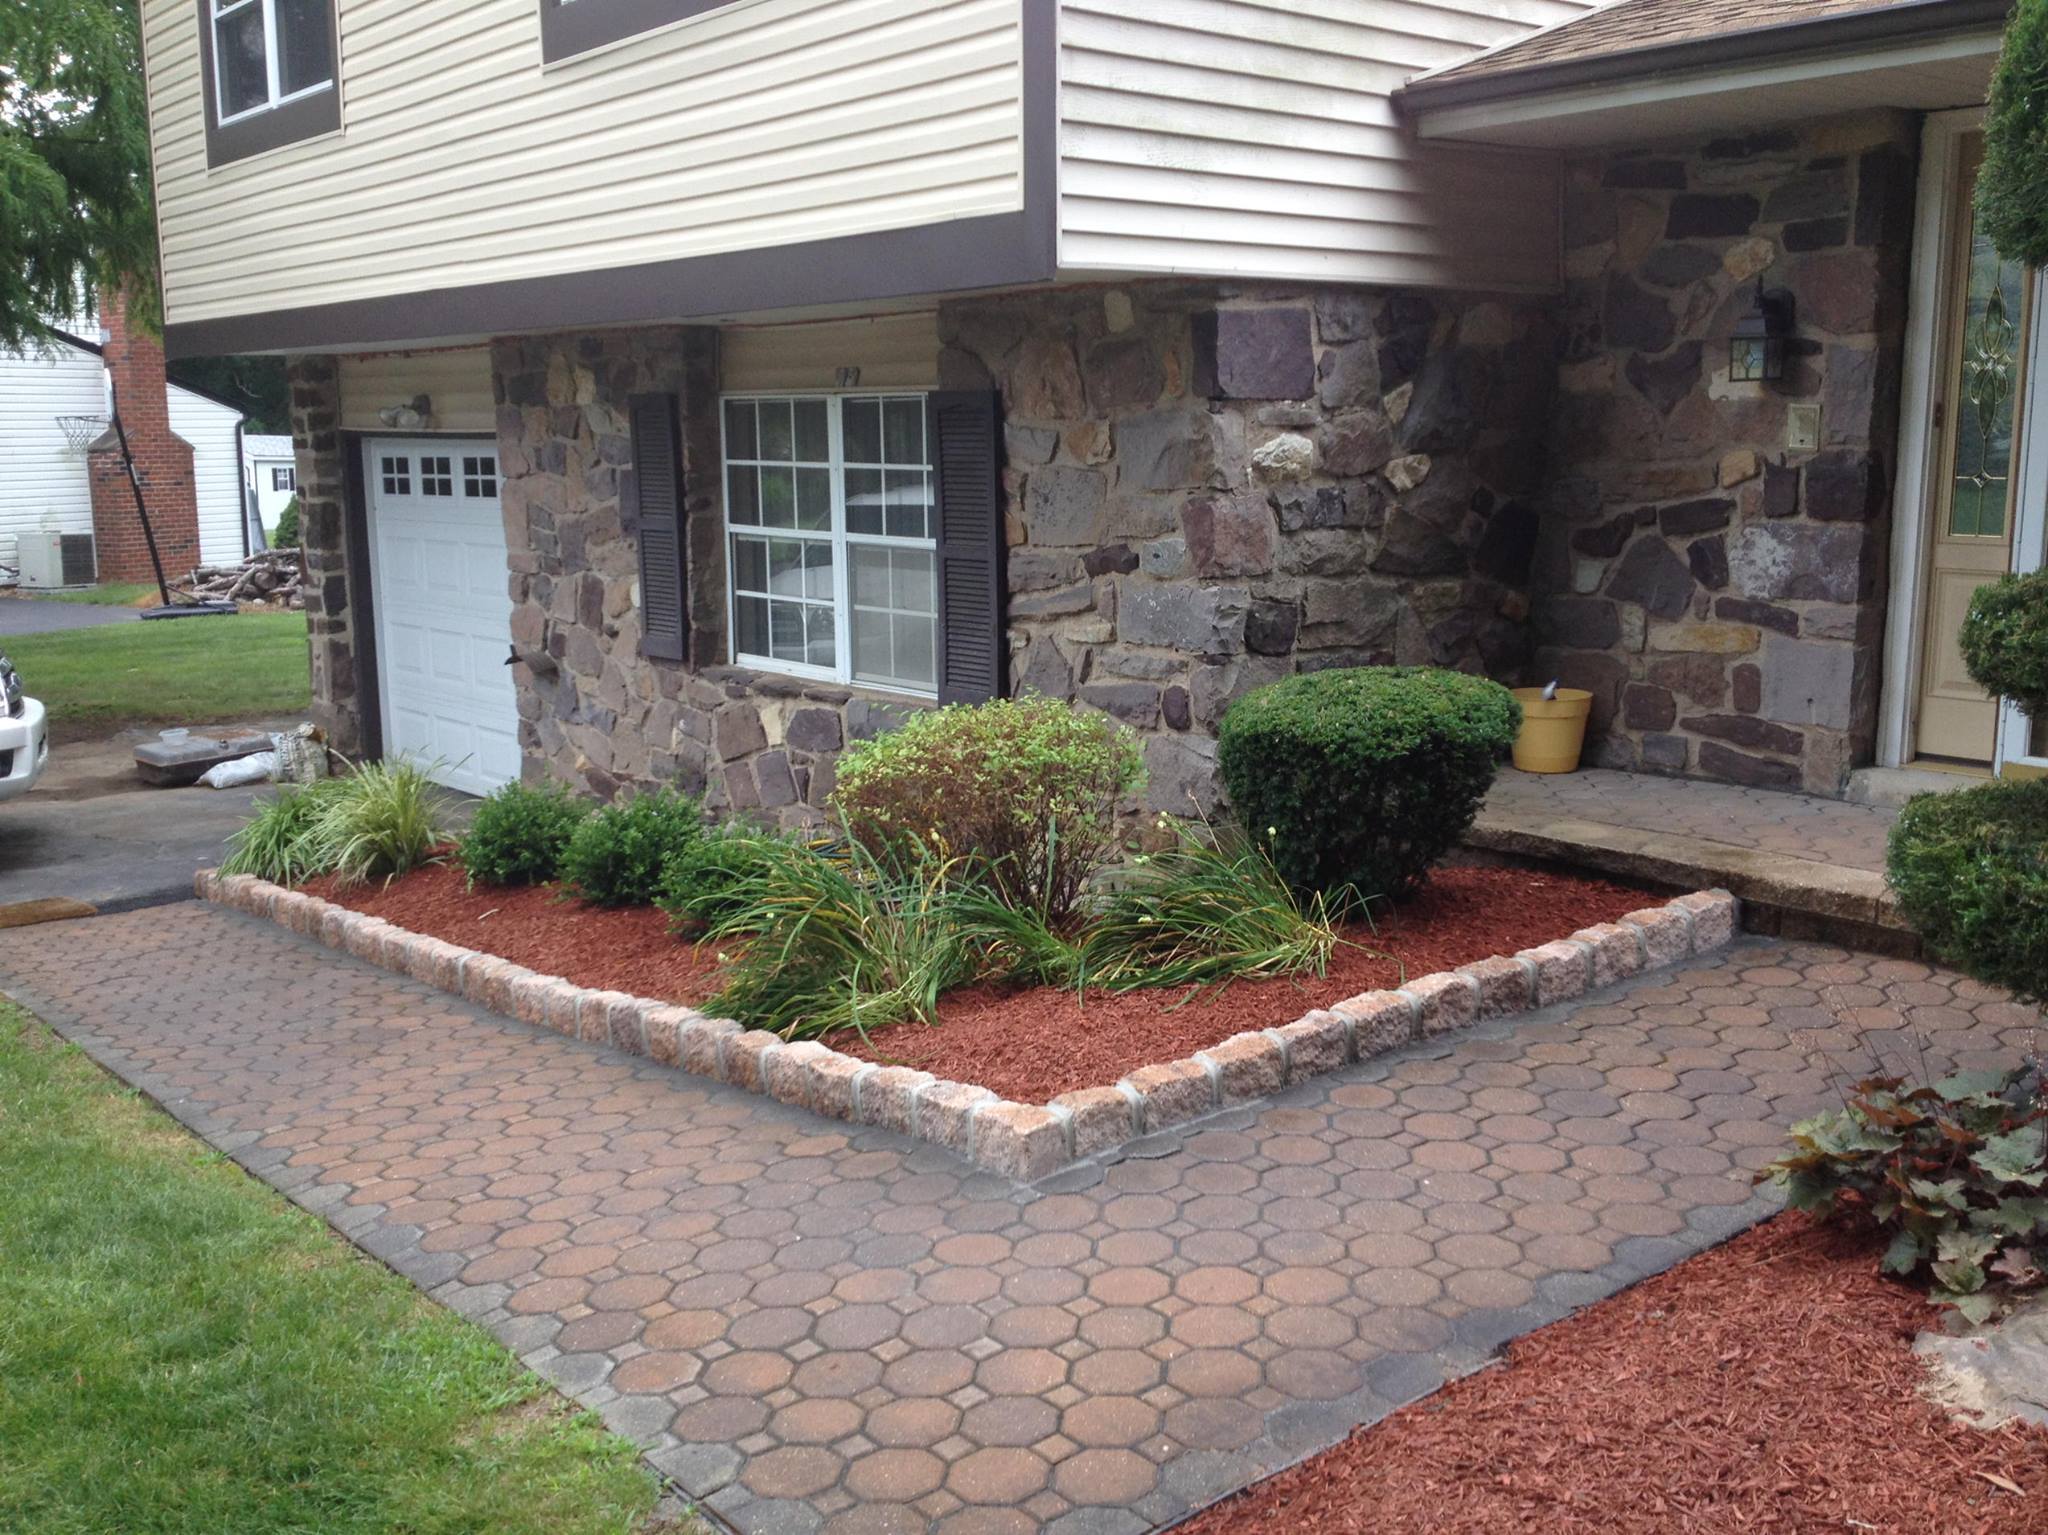 Professional Landscaping in Bucks County